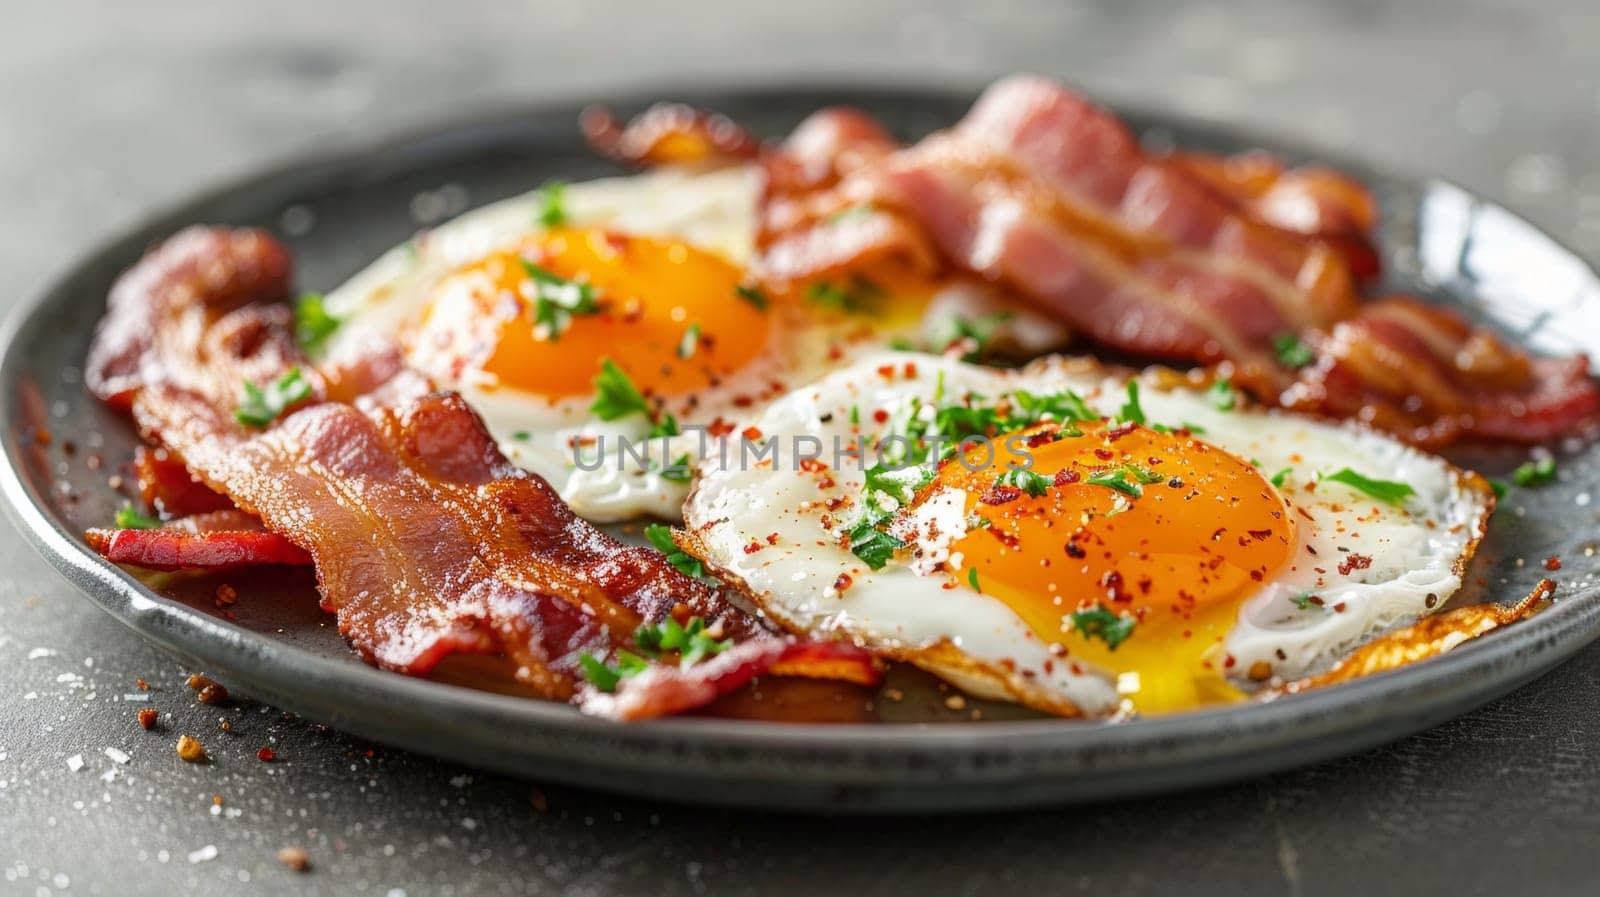 A plate of bacon and eggs on a black table